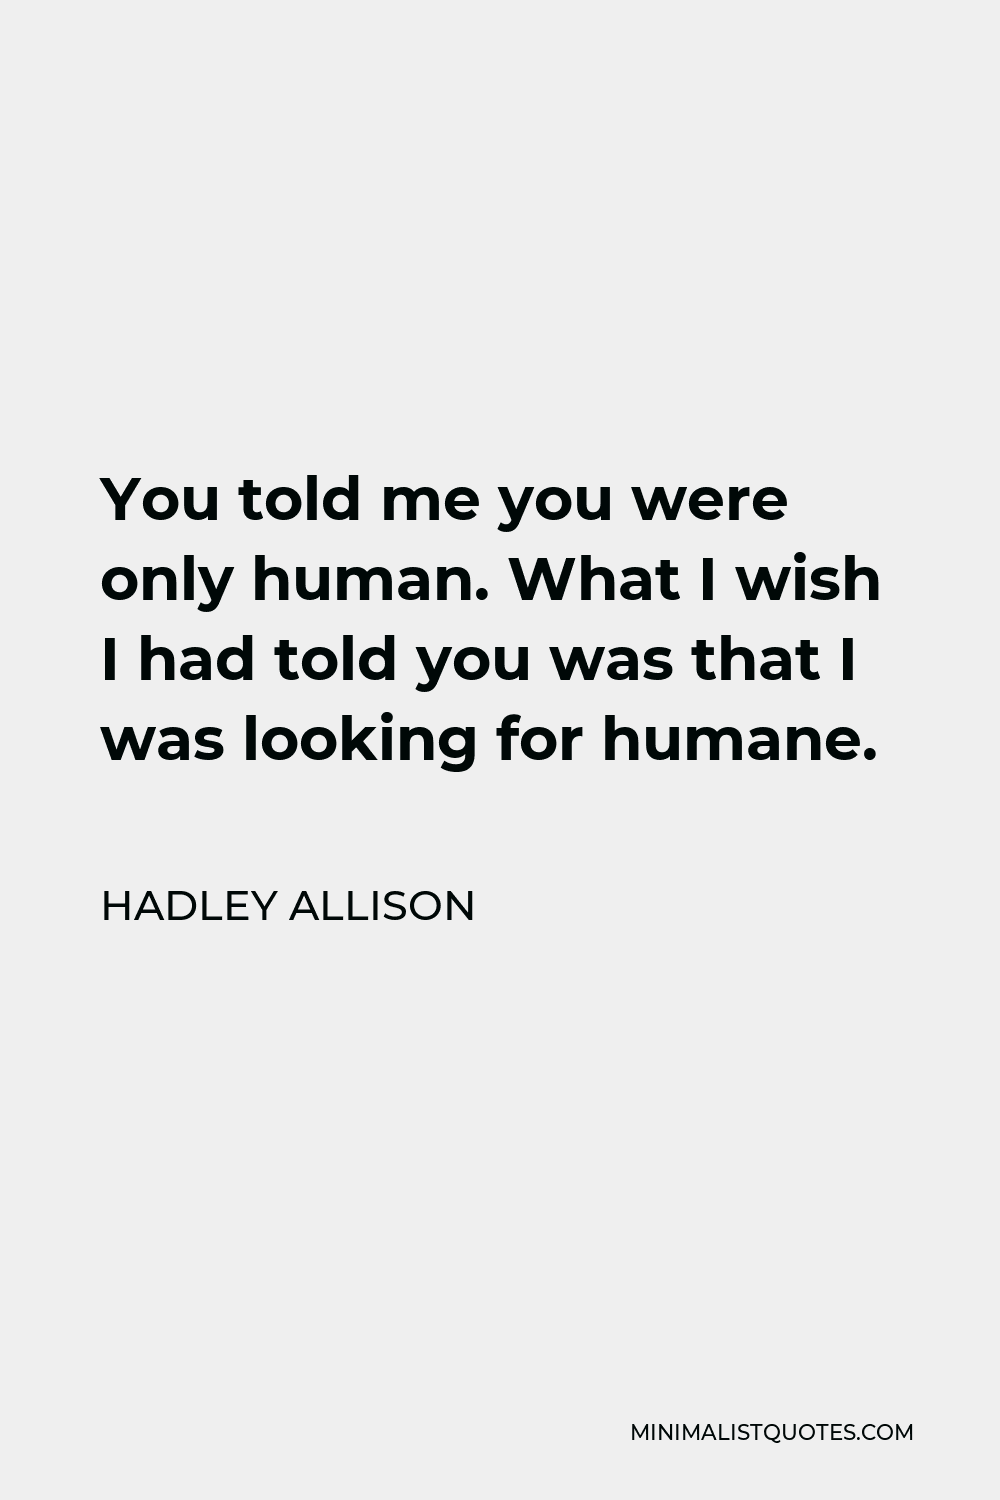 Hadley Allison Quote - You told me you were only human. What I wish I had told you was that I was looking for humane.